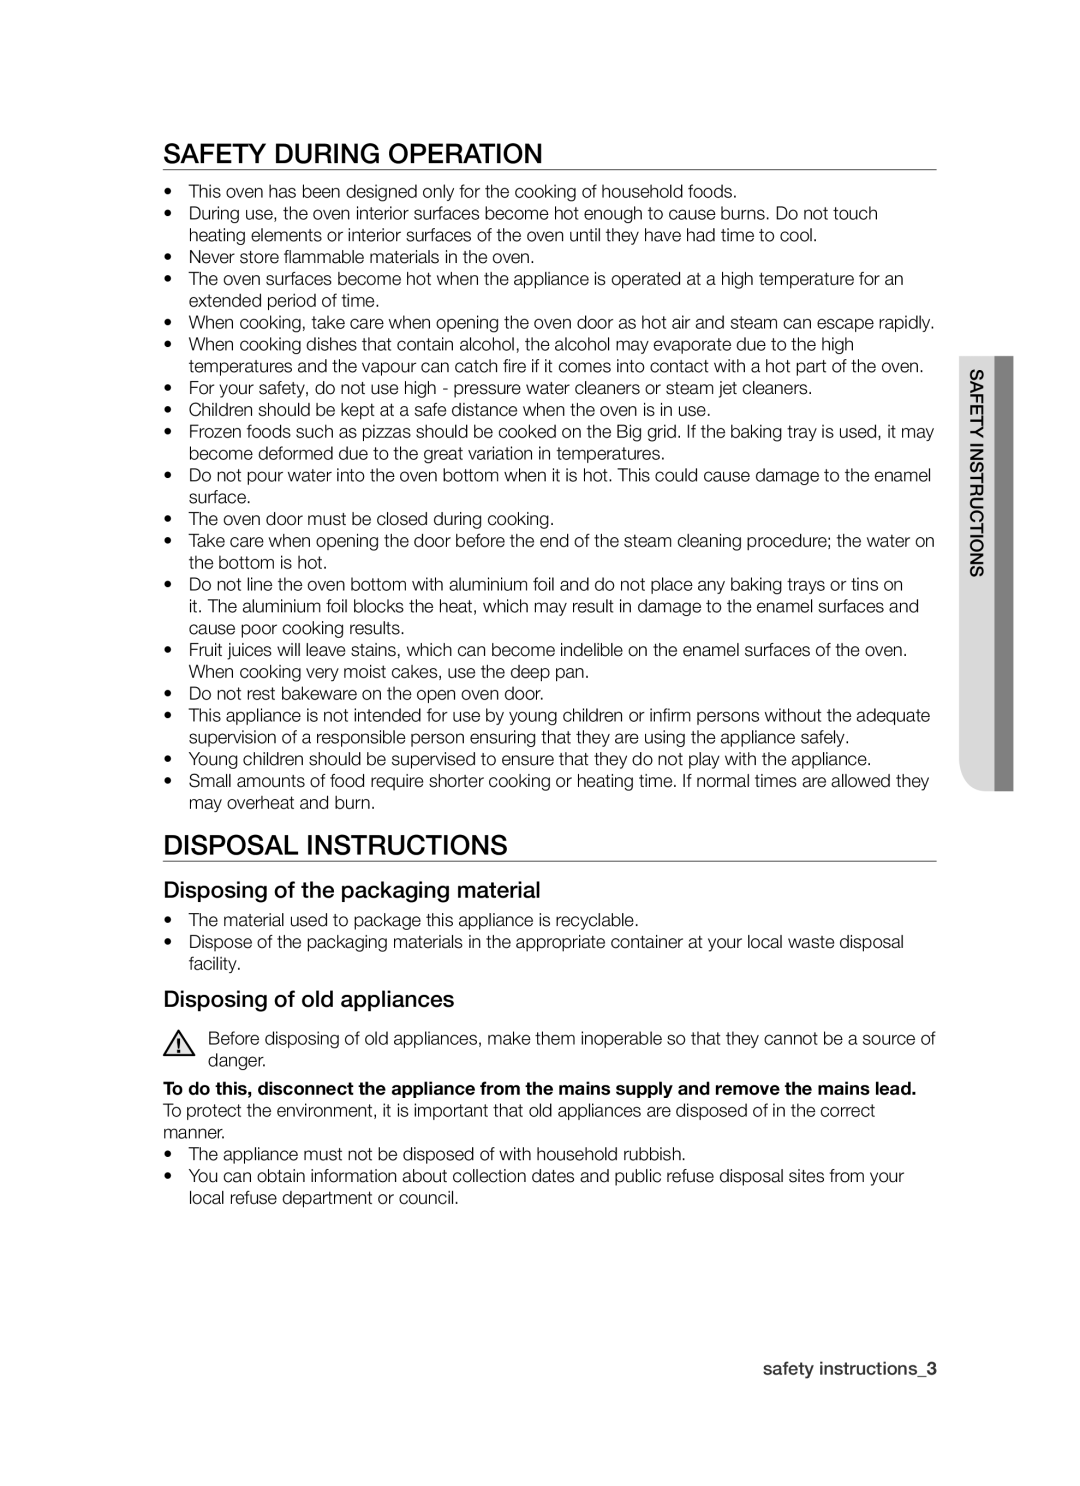 Samsung BT621 Series user manual Safety During Operation, Disposal Instructions, Disposing of the packaging material 